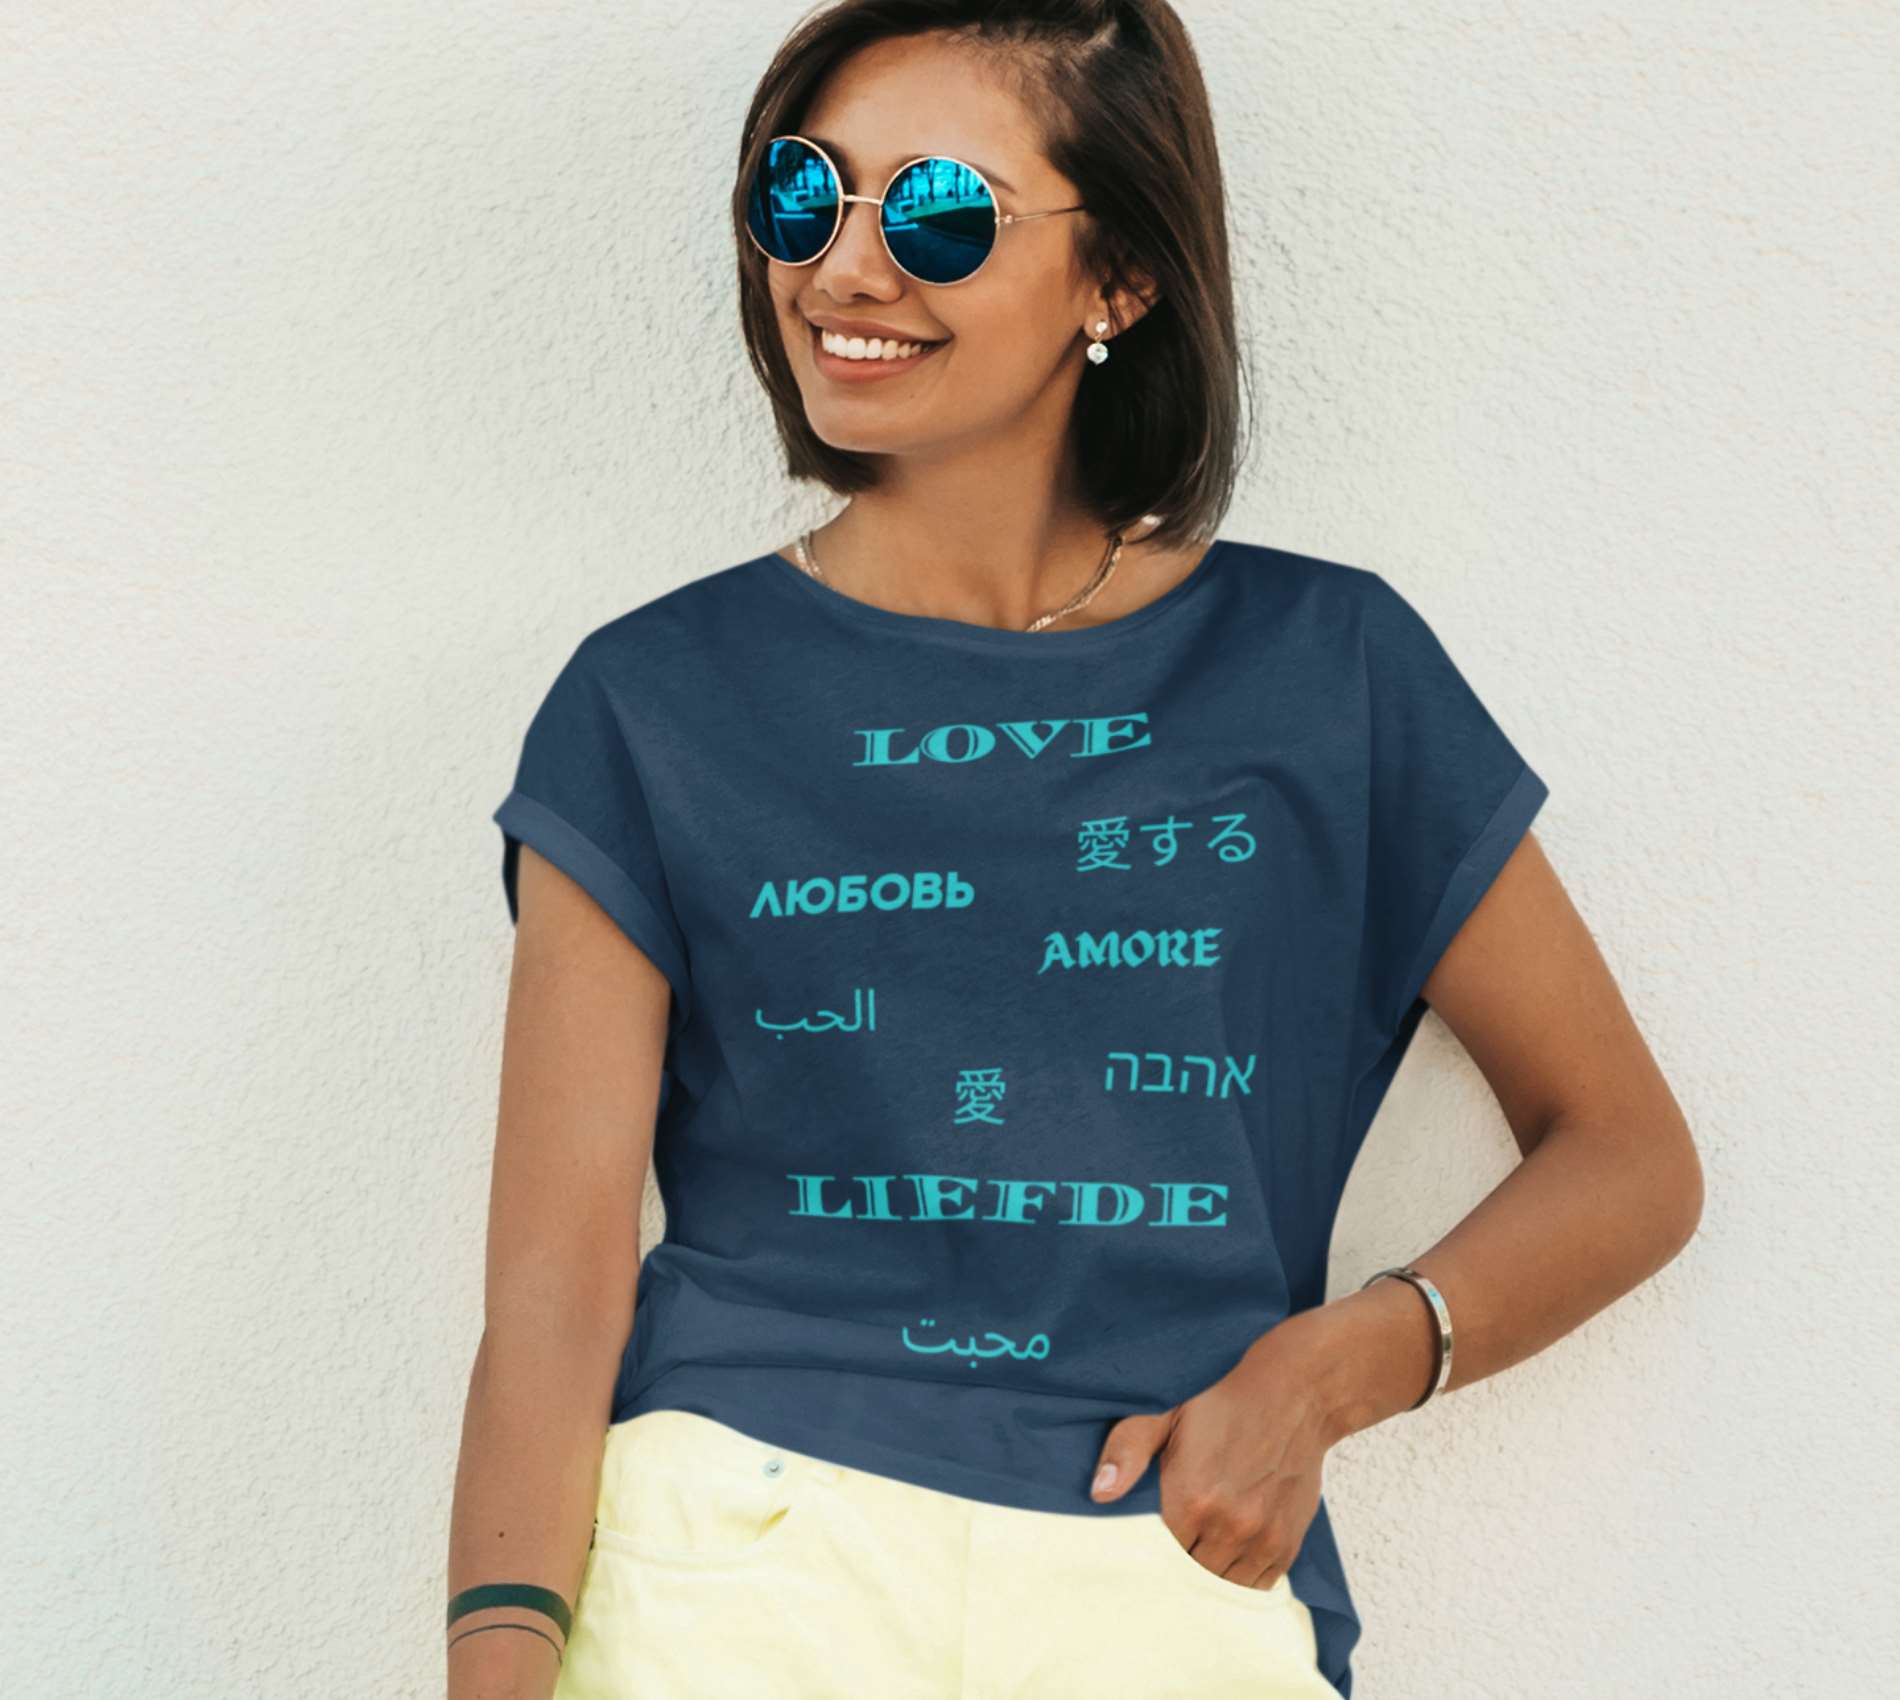 Love is International Green Text- Unisex T-shirt for Women, Love and Piece T-shirt, Trend Now UK - Amisity